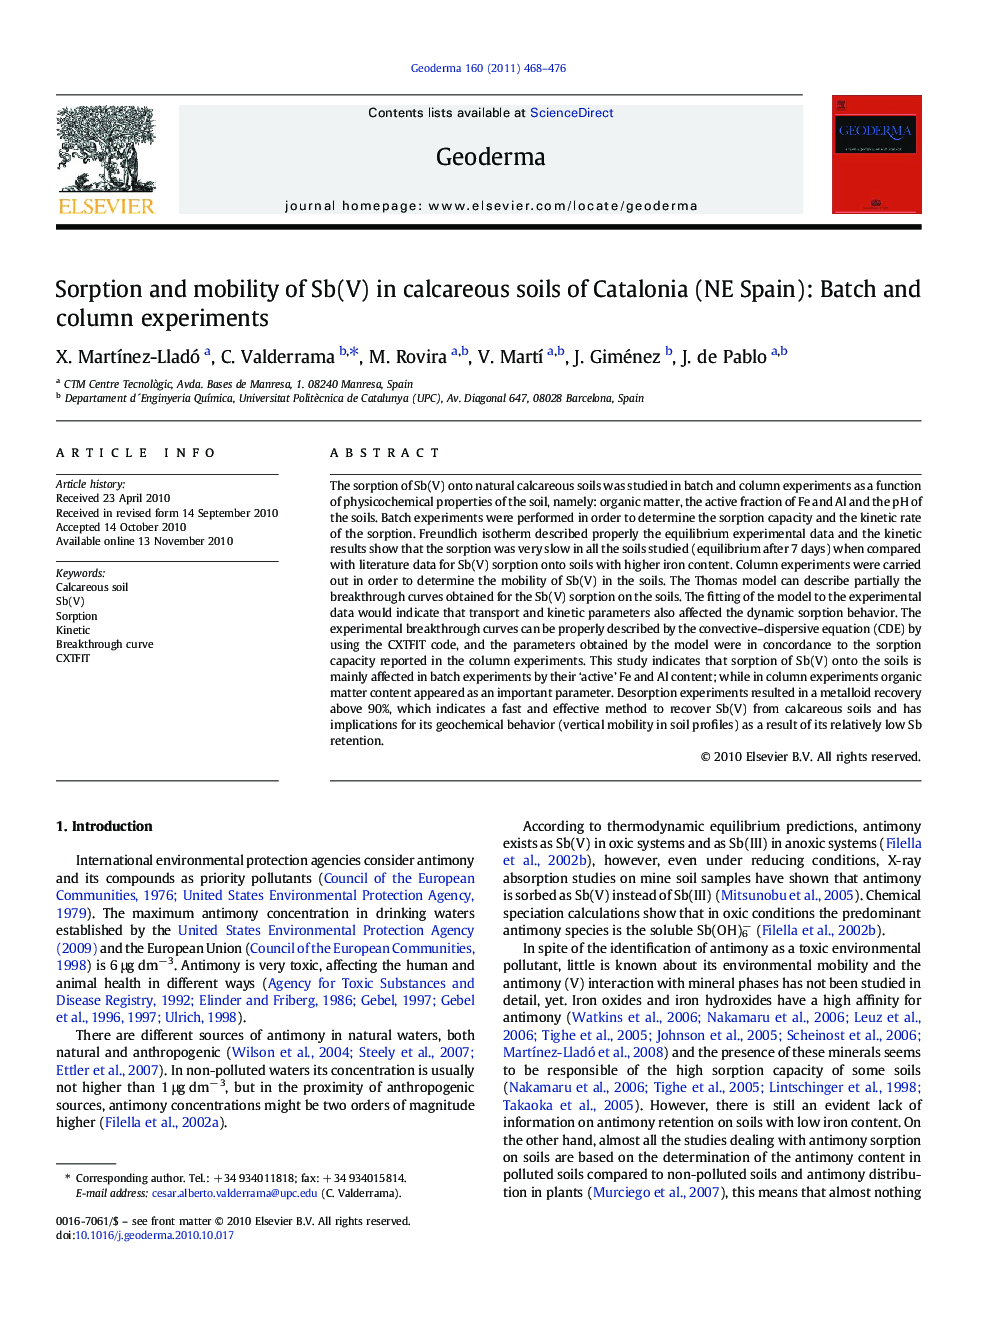 Sorption and mobility of Sb(V) in calcareous soils of Catalonia (NE Spain): Batch and column experiments